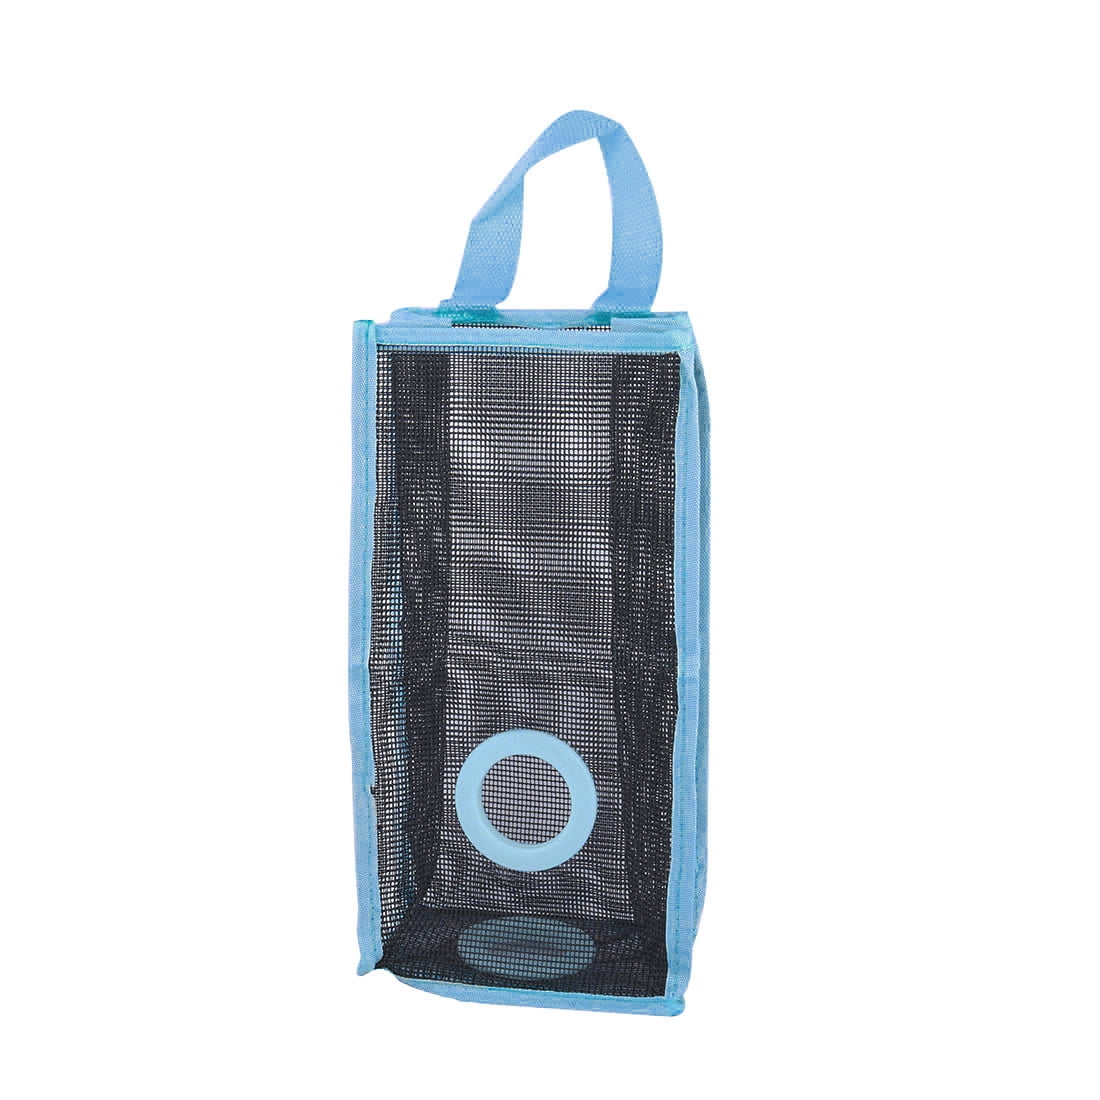 Unique Bargains Household Bathroom PVC Mesh Wall Hanging Grocery Bag Holder Storage Container Light Blue